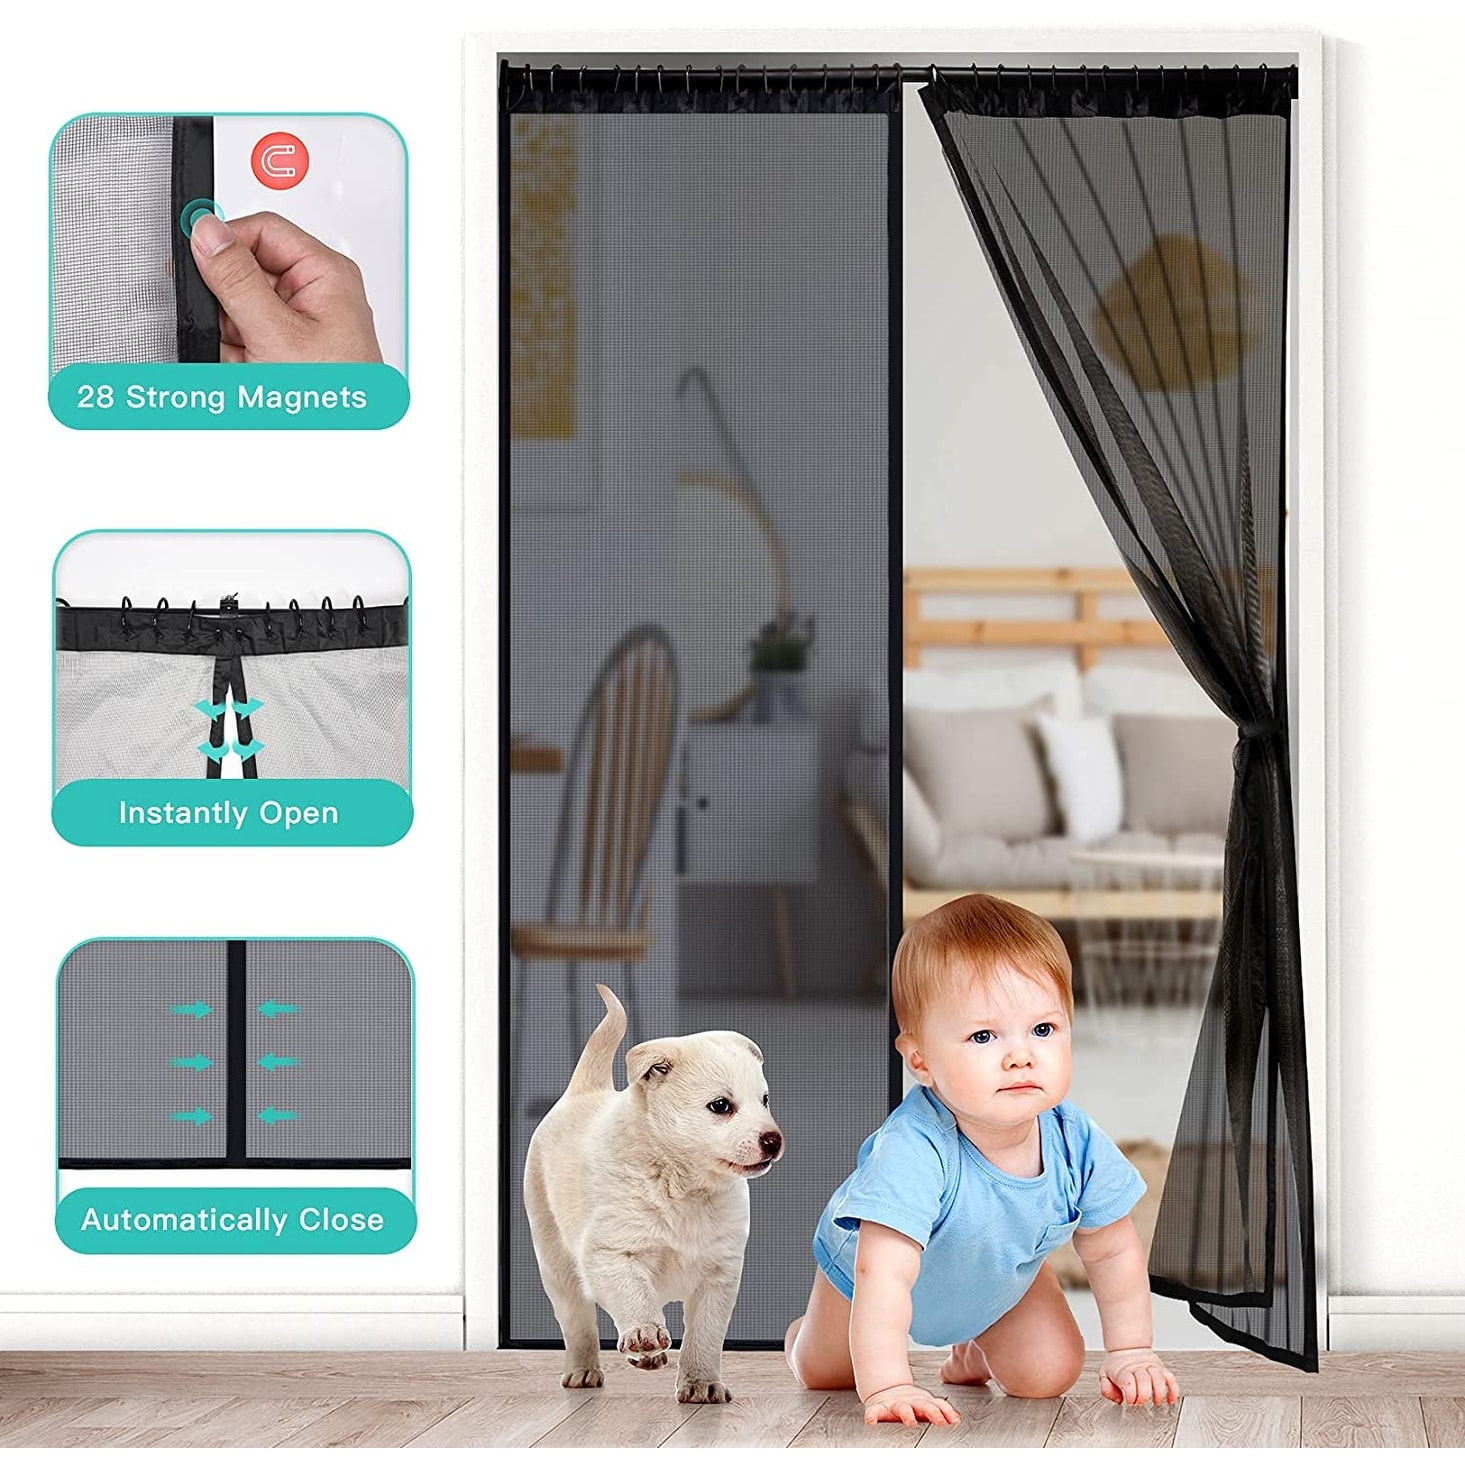 Magnetic Screen Protection Mosquito Door Net Curtain W/ full Frame Hook & Look 